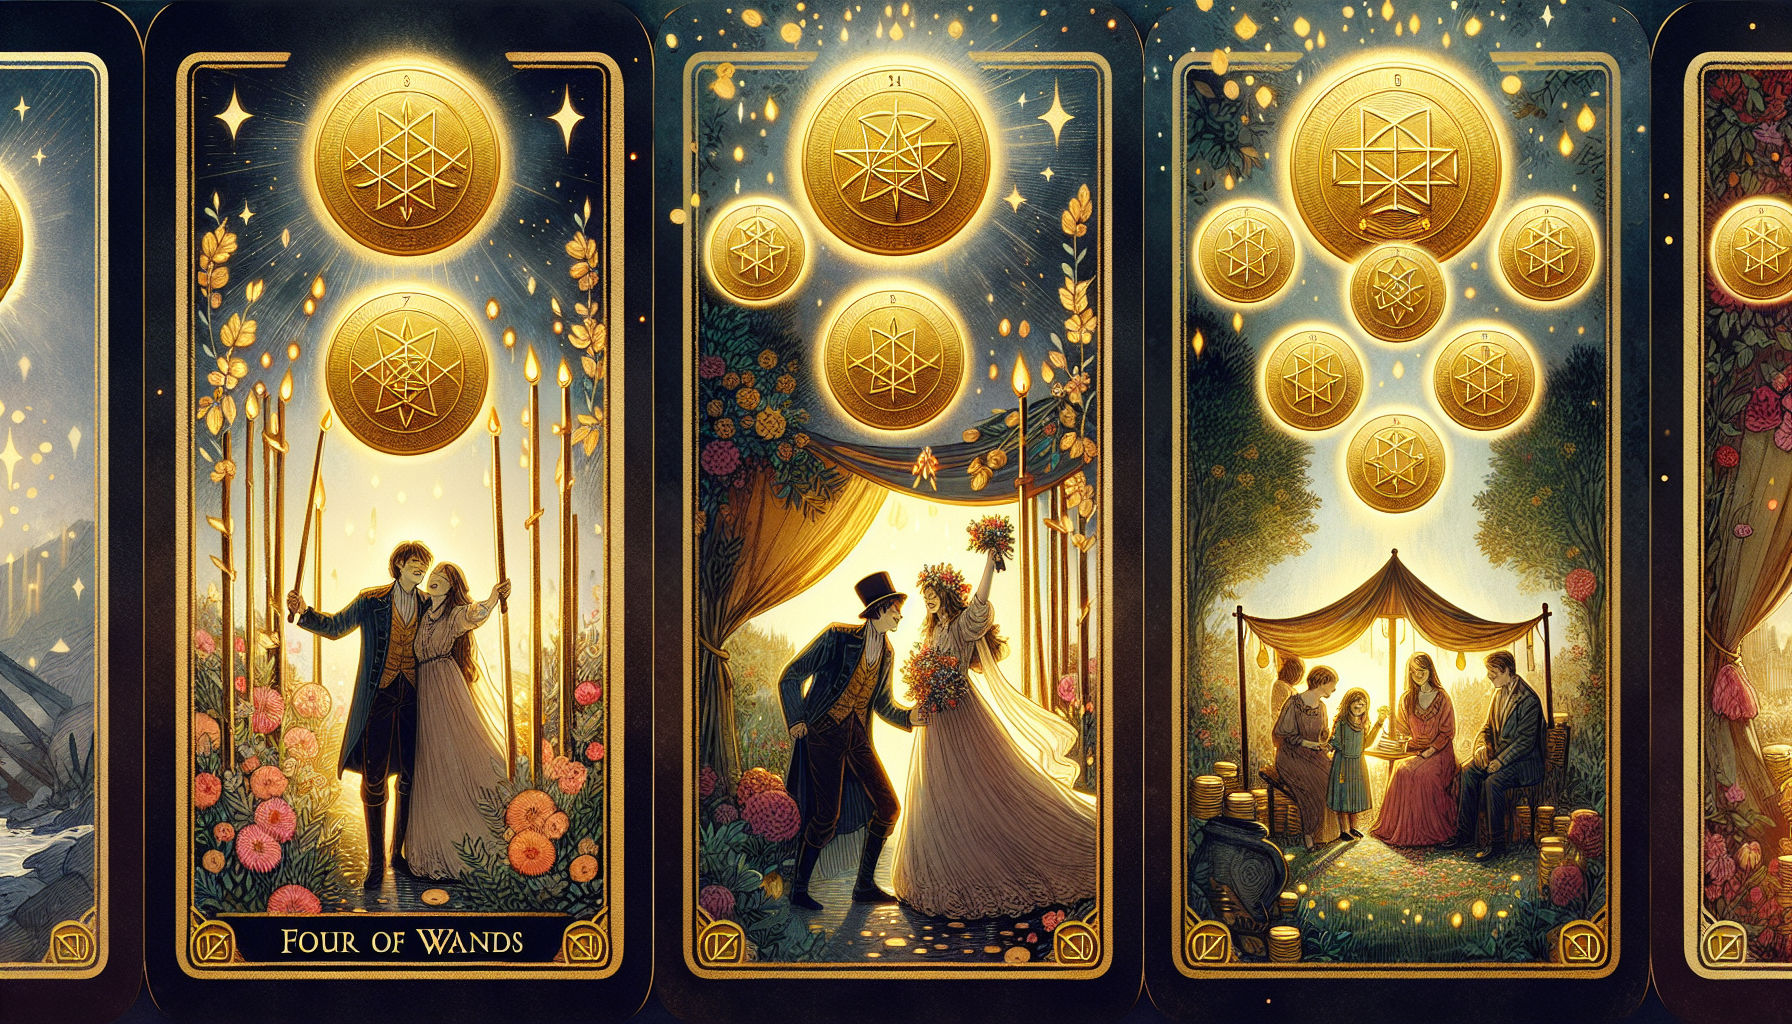 Illustration of tarot cards Four of Wands and Ten of Pentacles representing commitment